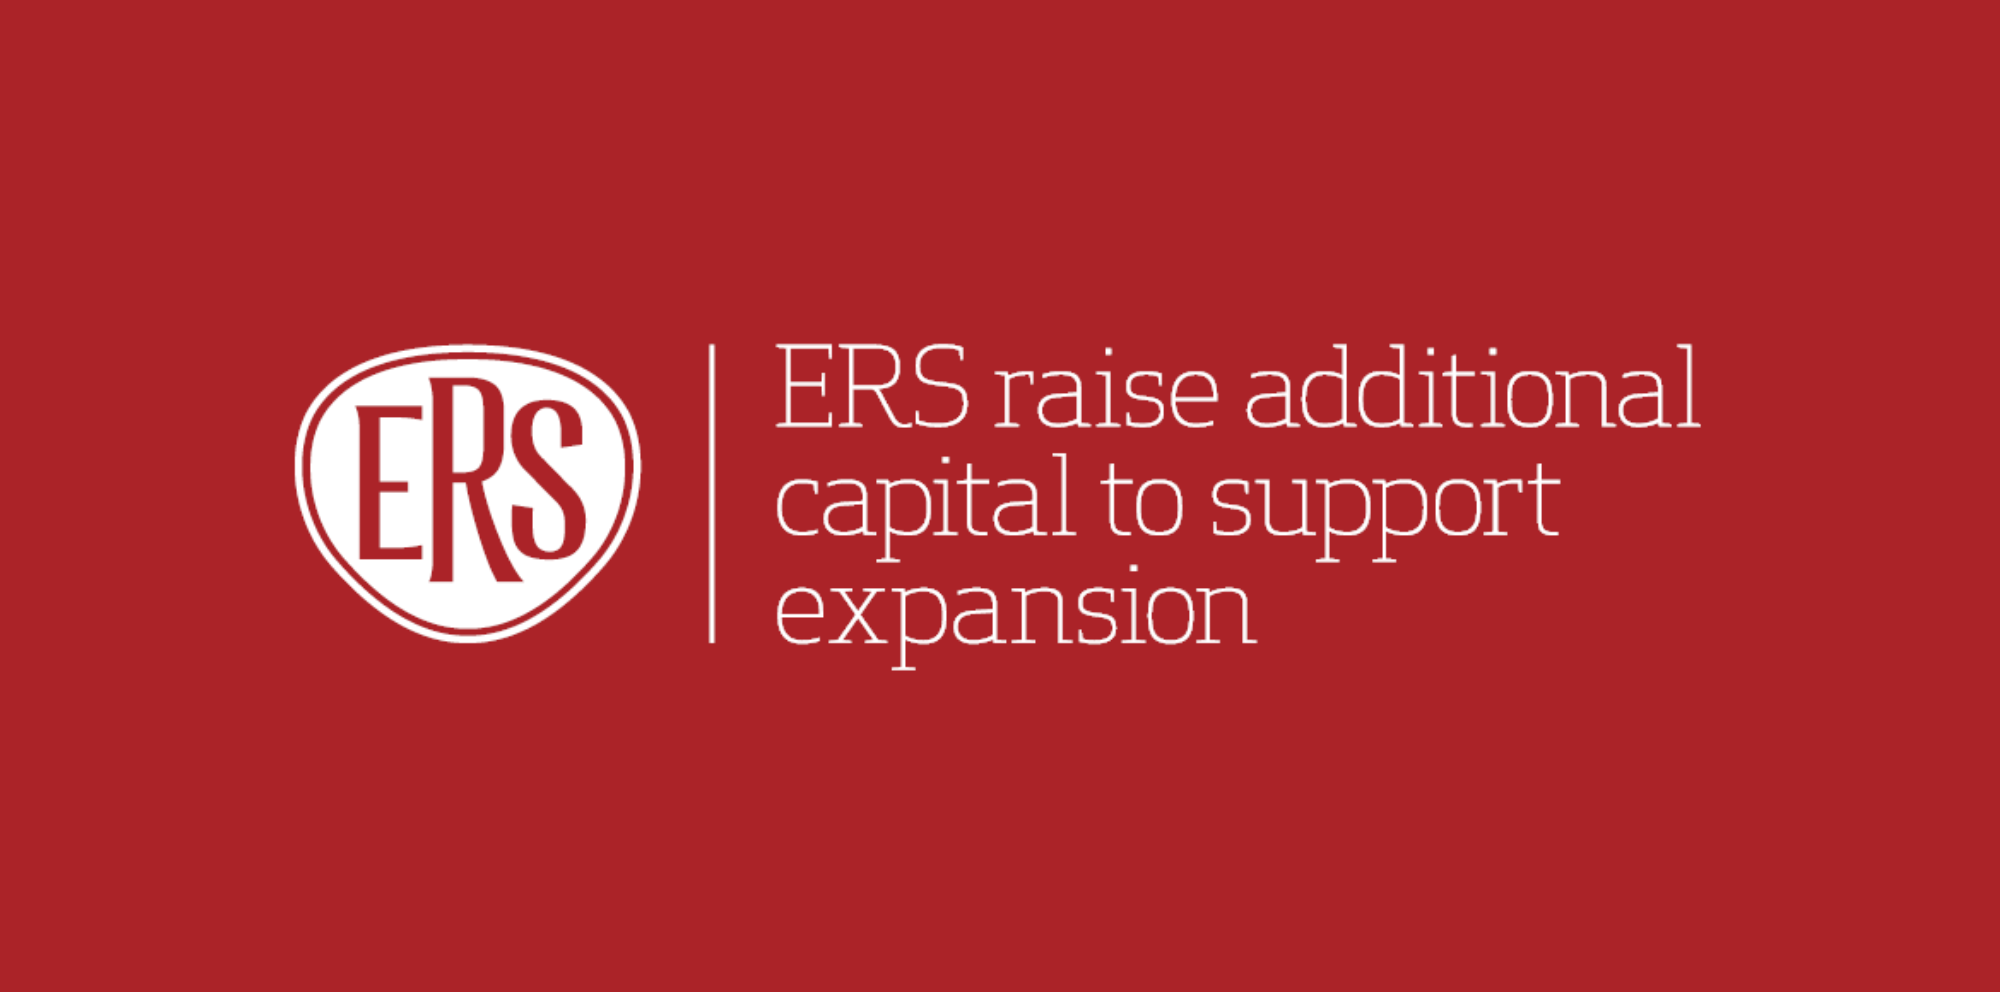 Ers Expand Bl